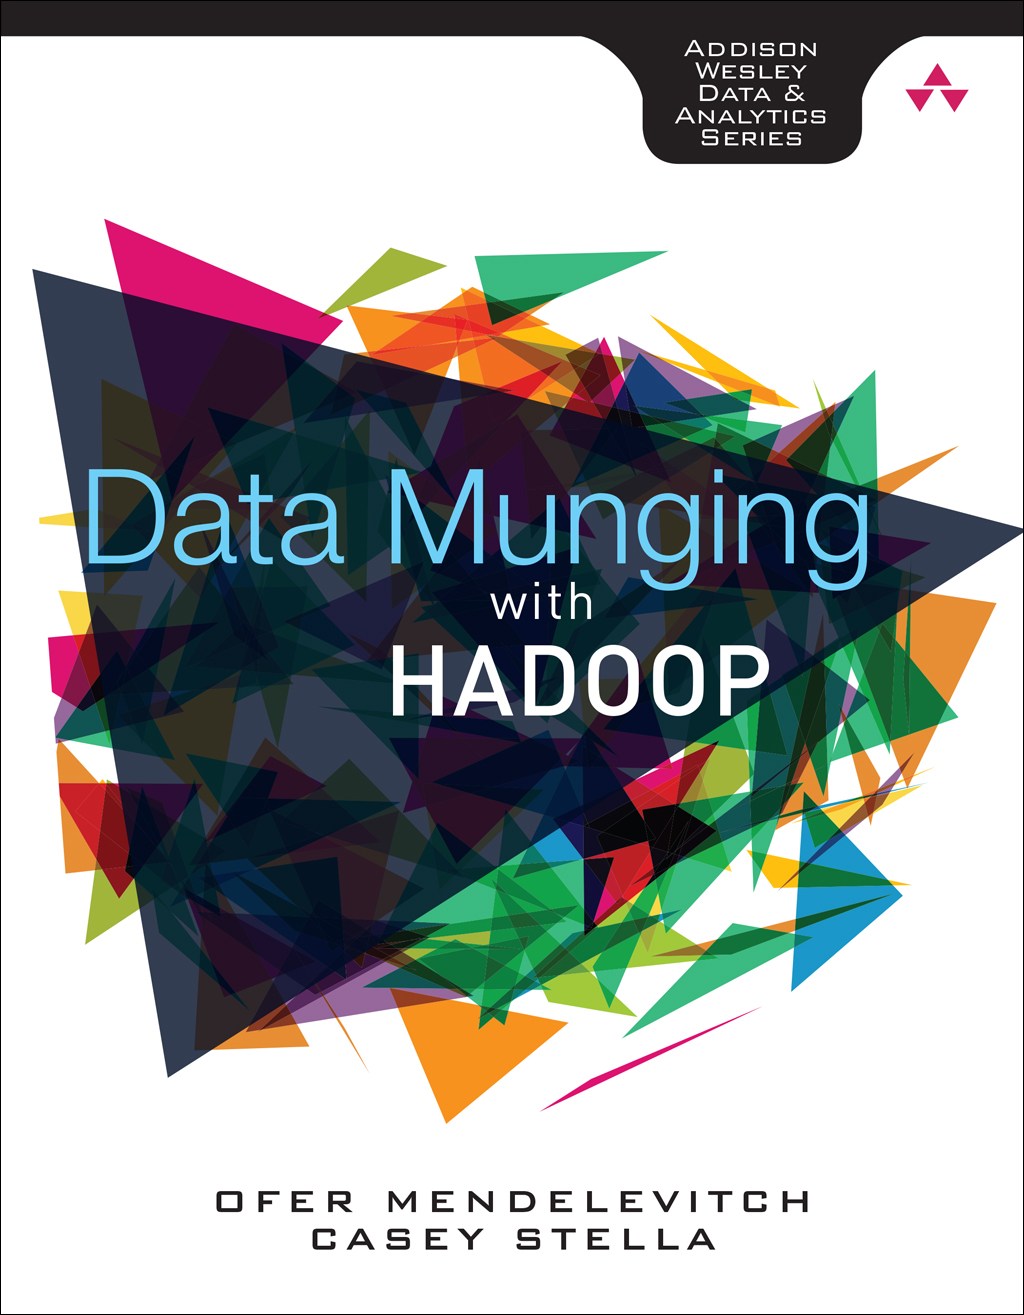 Data Munging with Hadoop